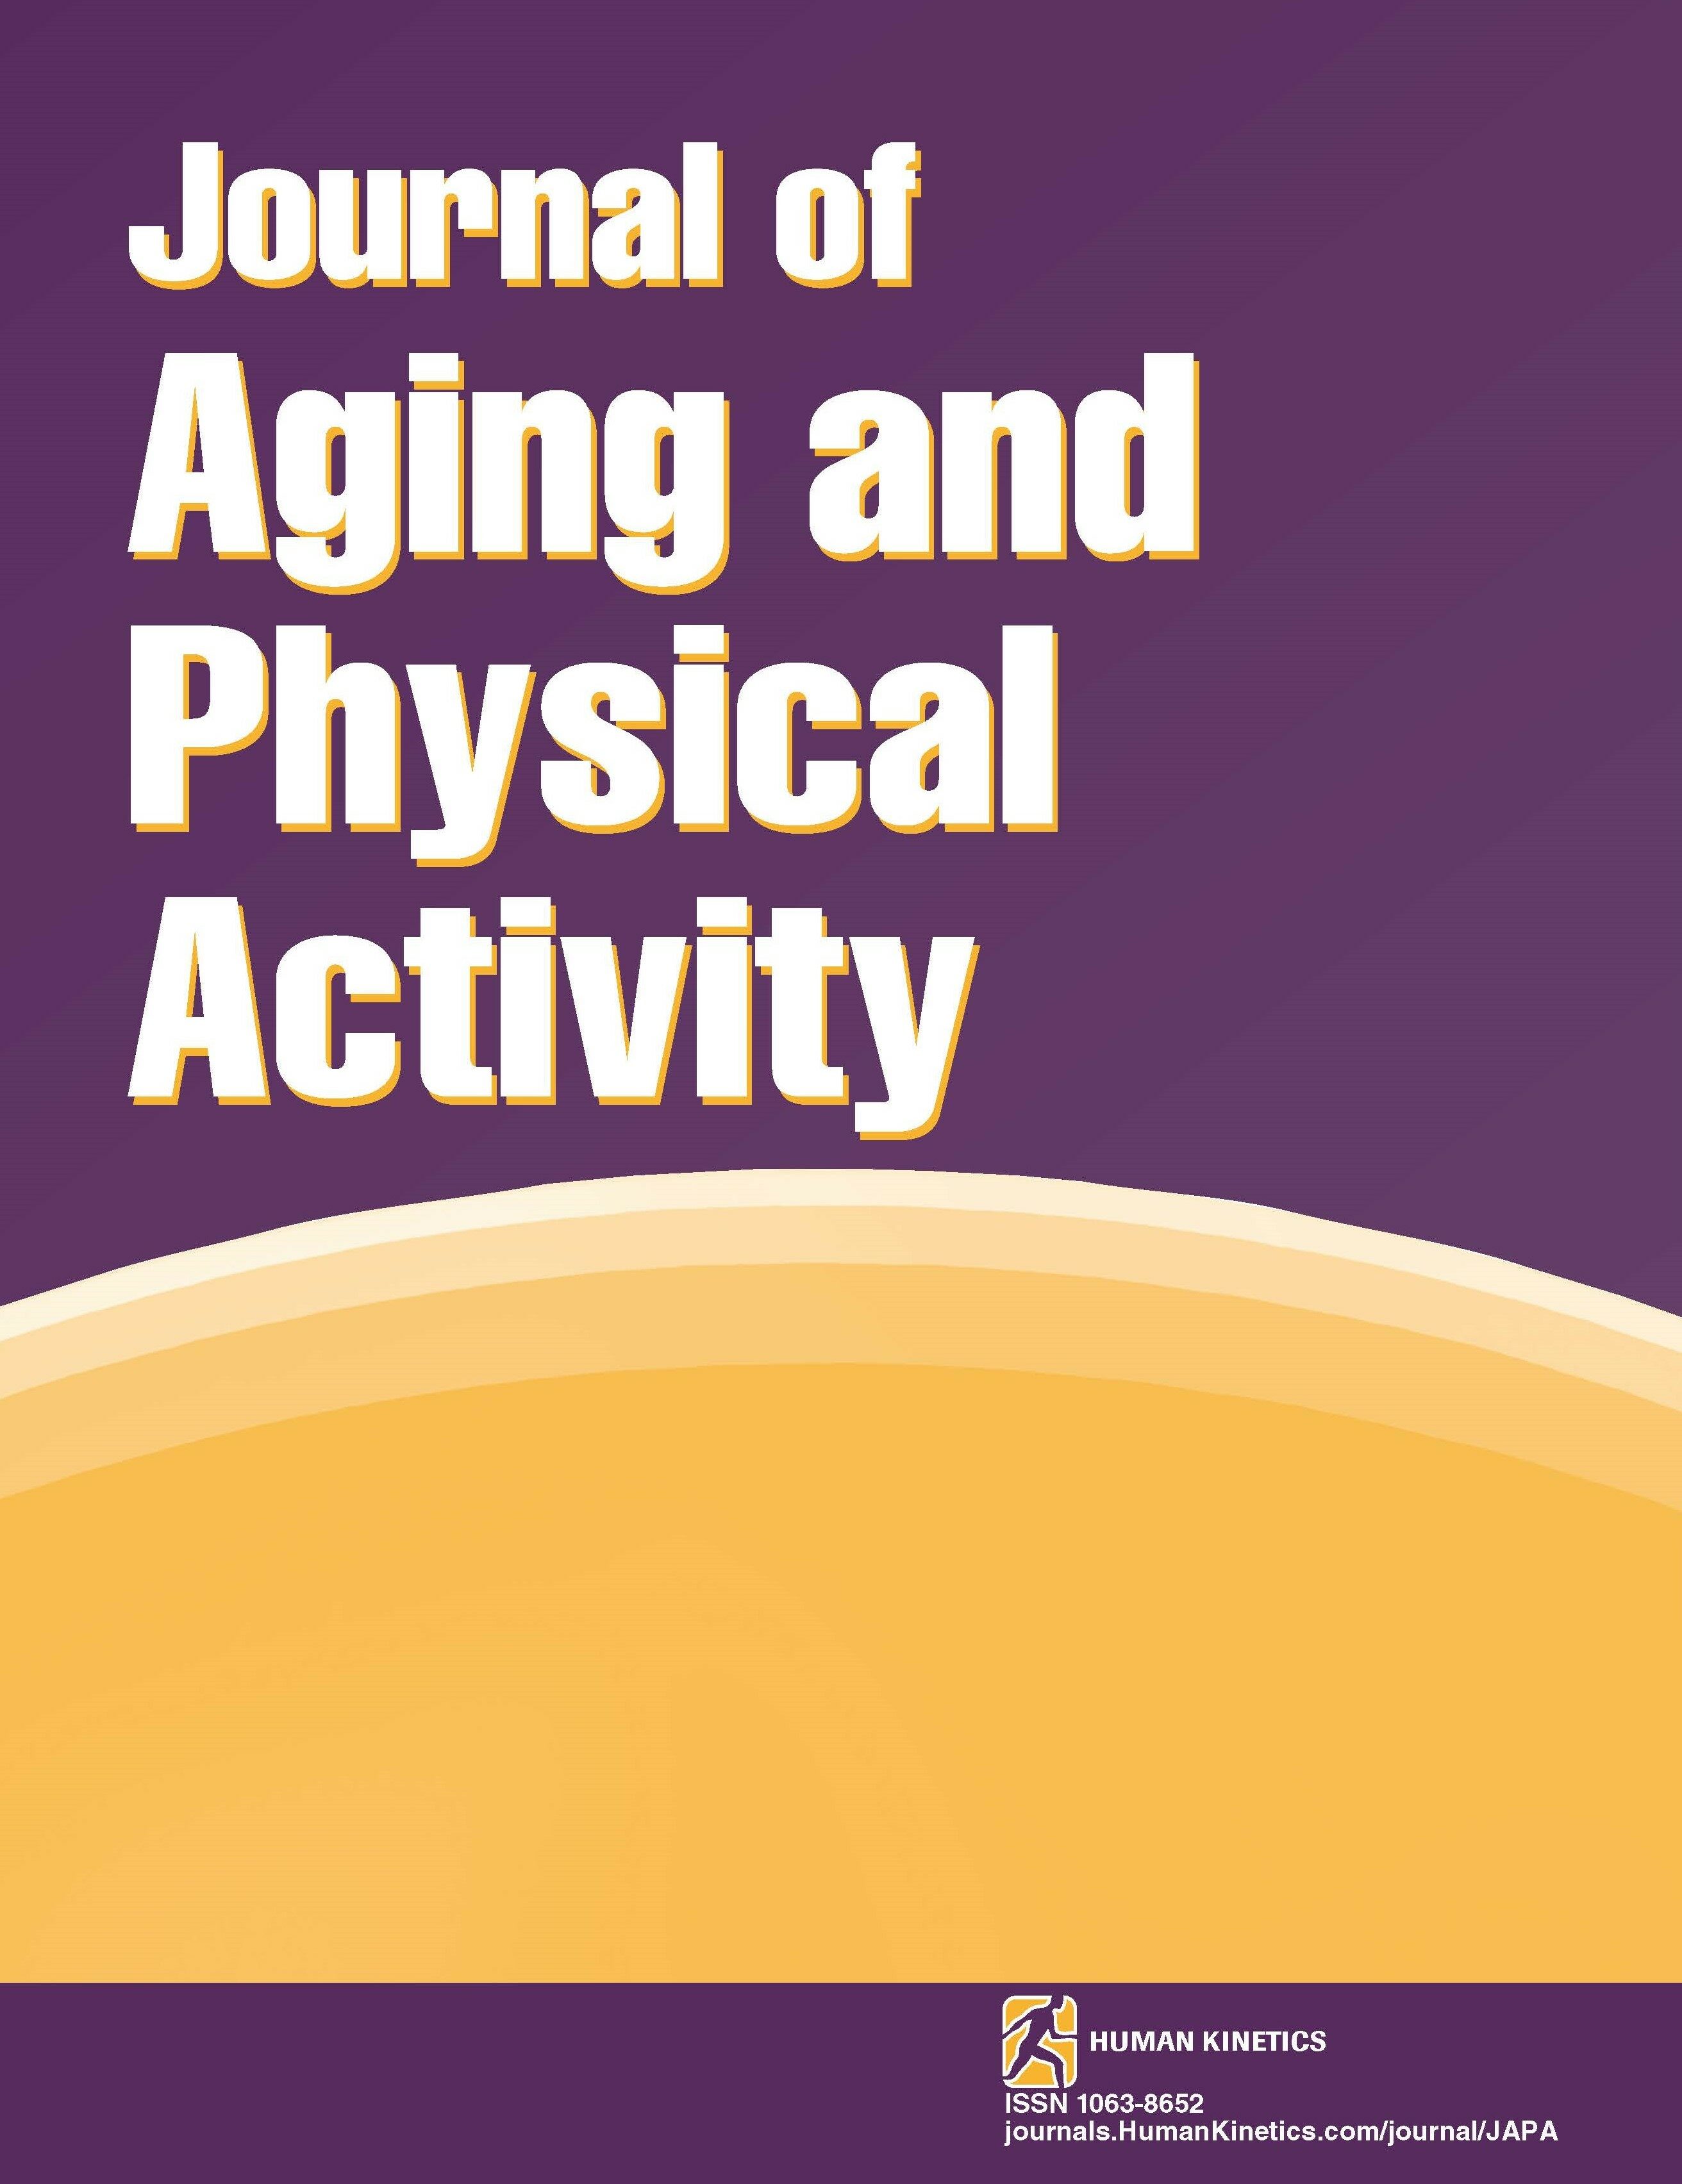 The Association Between Allostatic Load and Frailty Trajectories Among Adults Aged 50+ Years: Mediating Role of Physical Activity